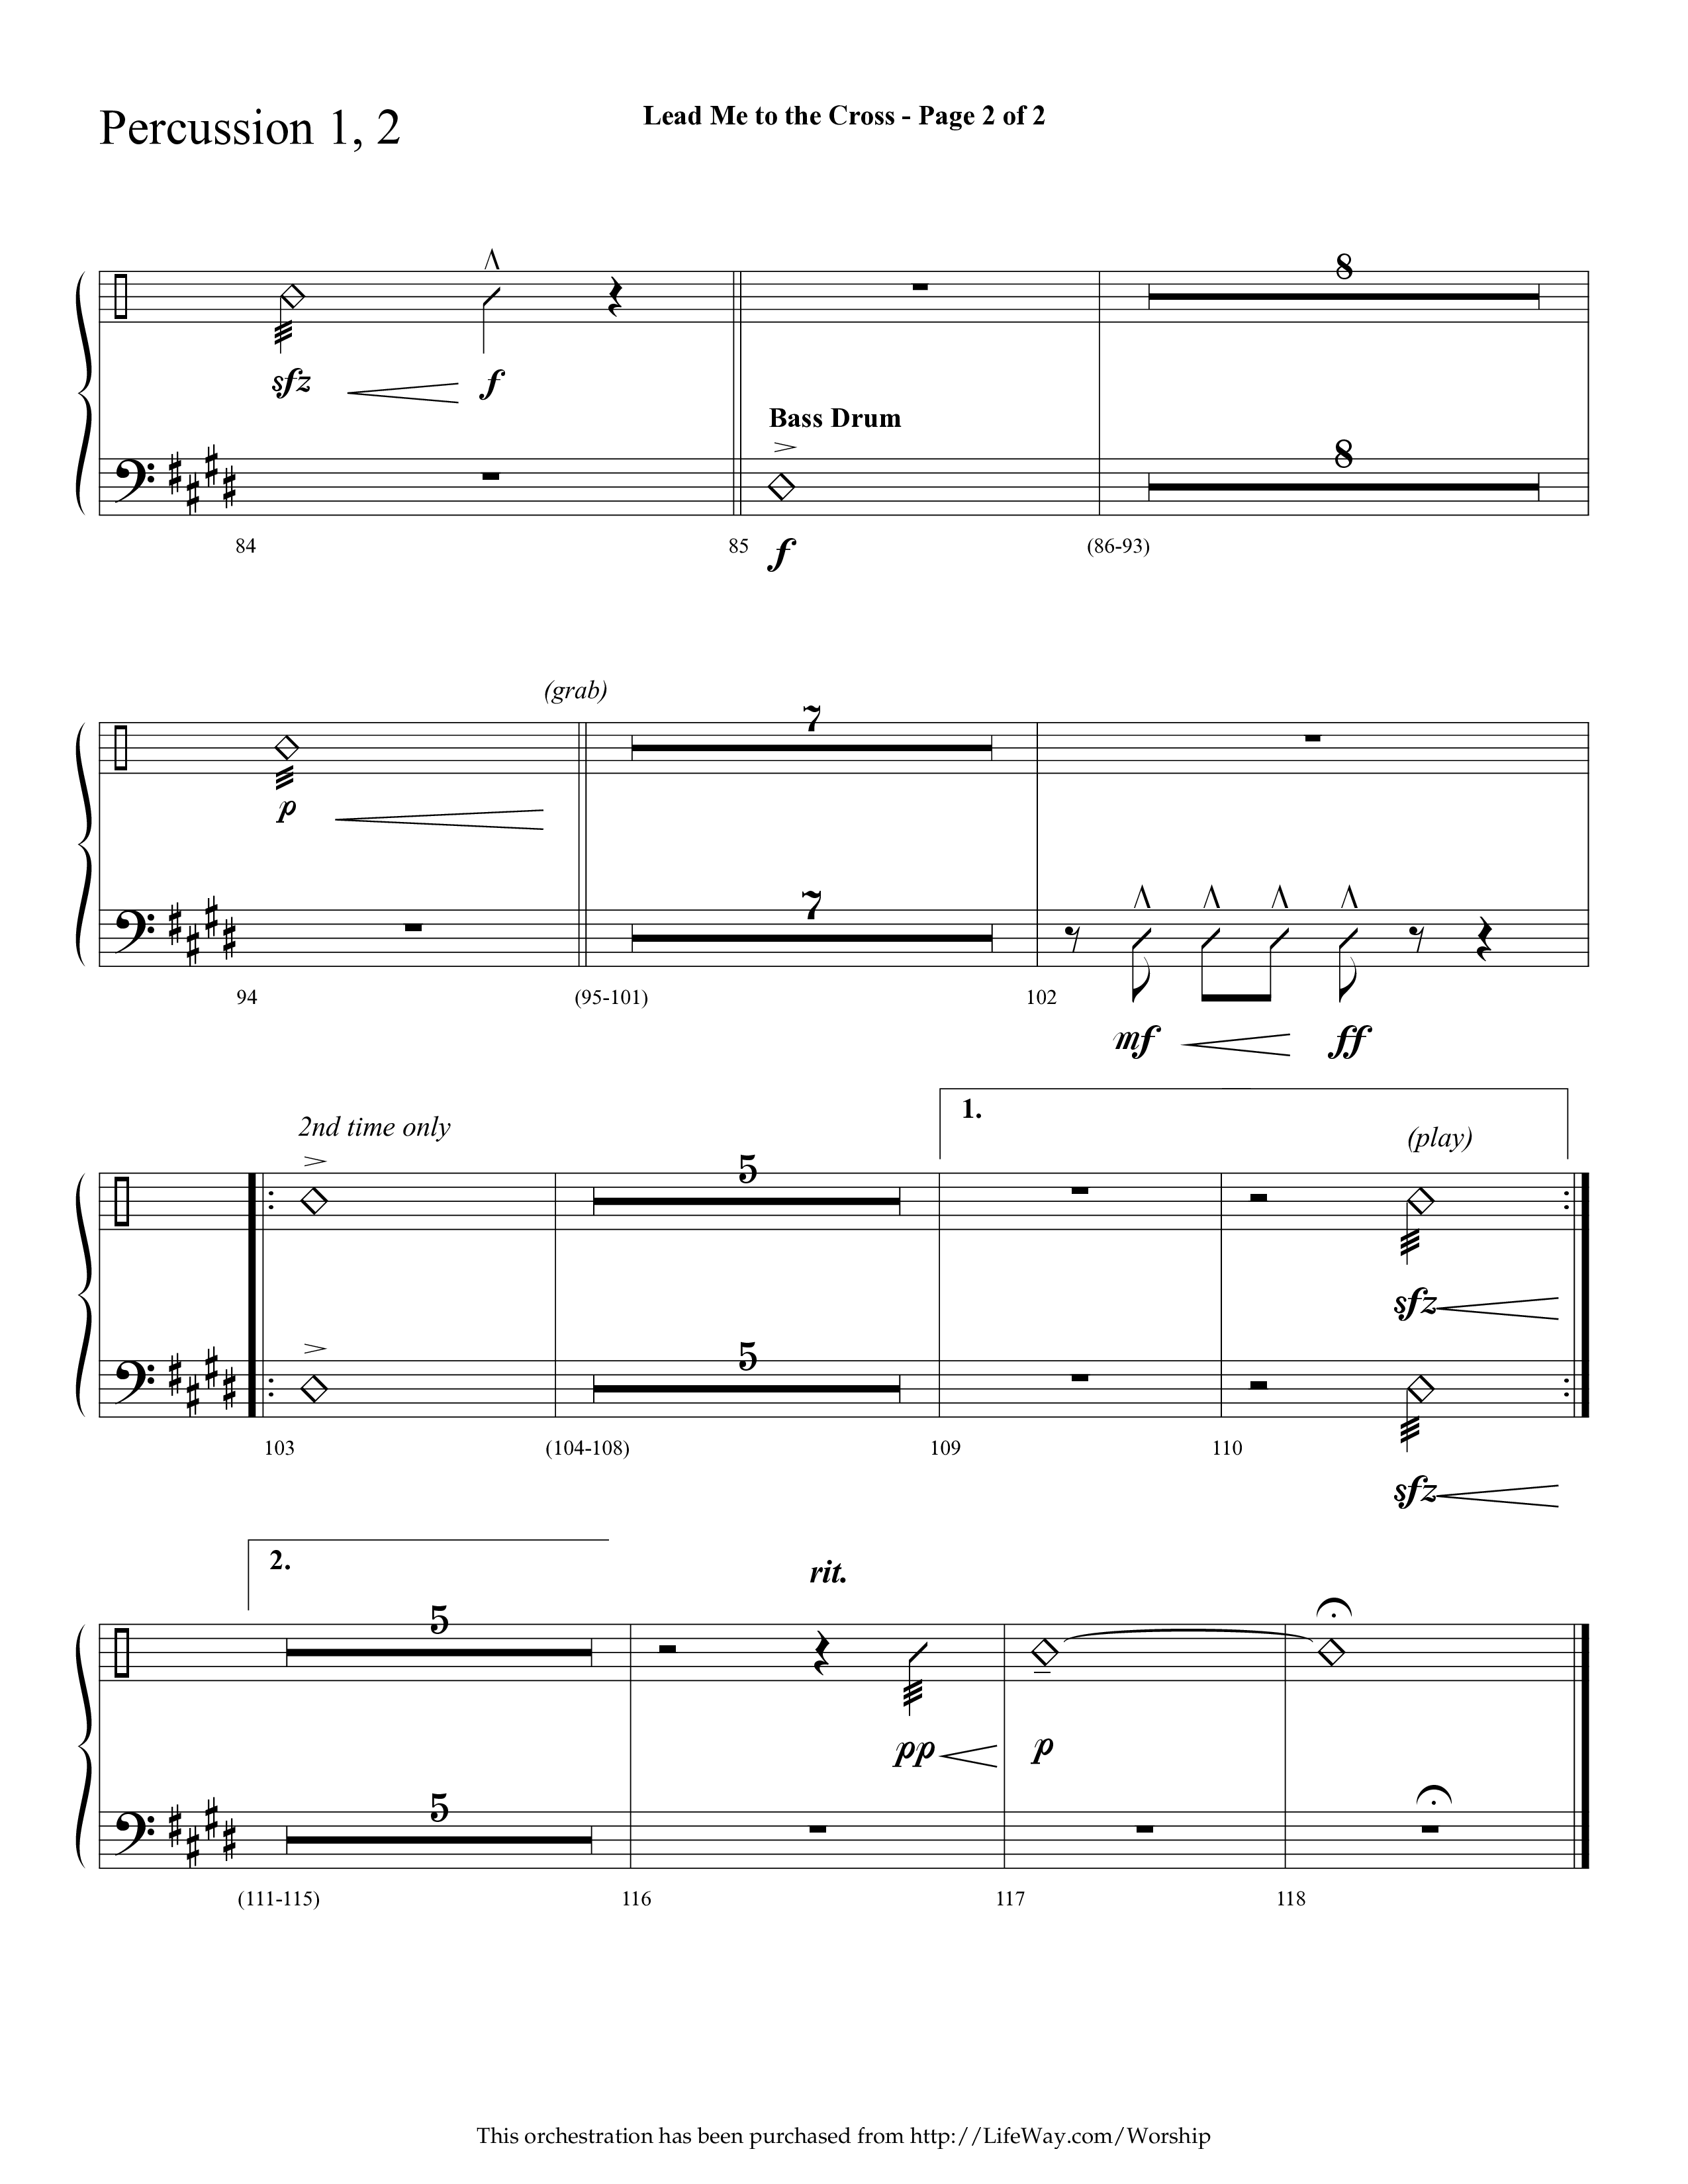 Lead Me To The Cross (Choral Anthem SATB) Percussion 1/2 (Lifeway Choral / Arr. Cliff Duren)